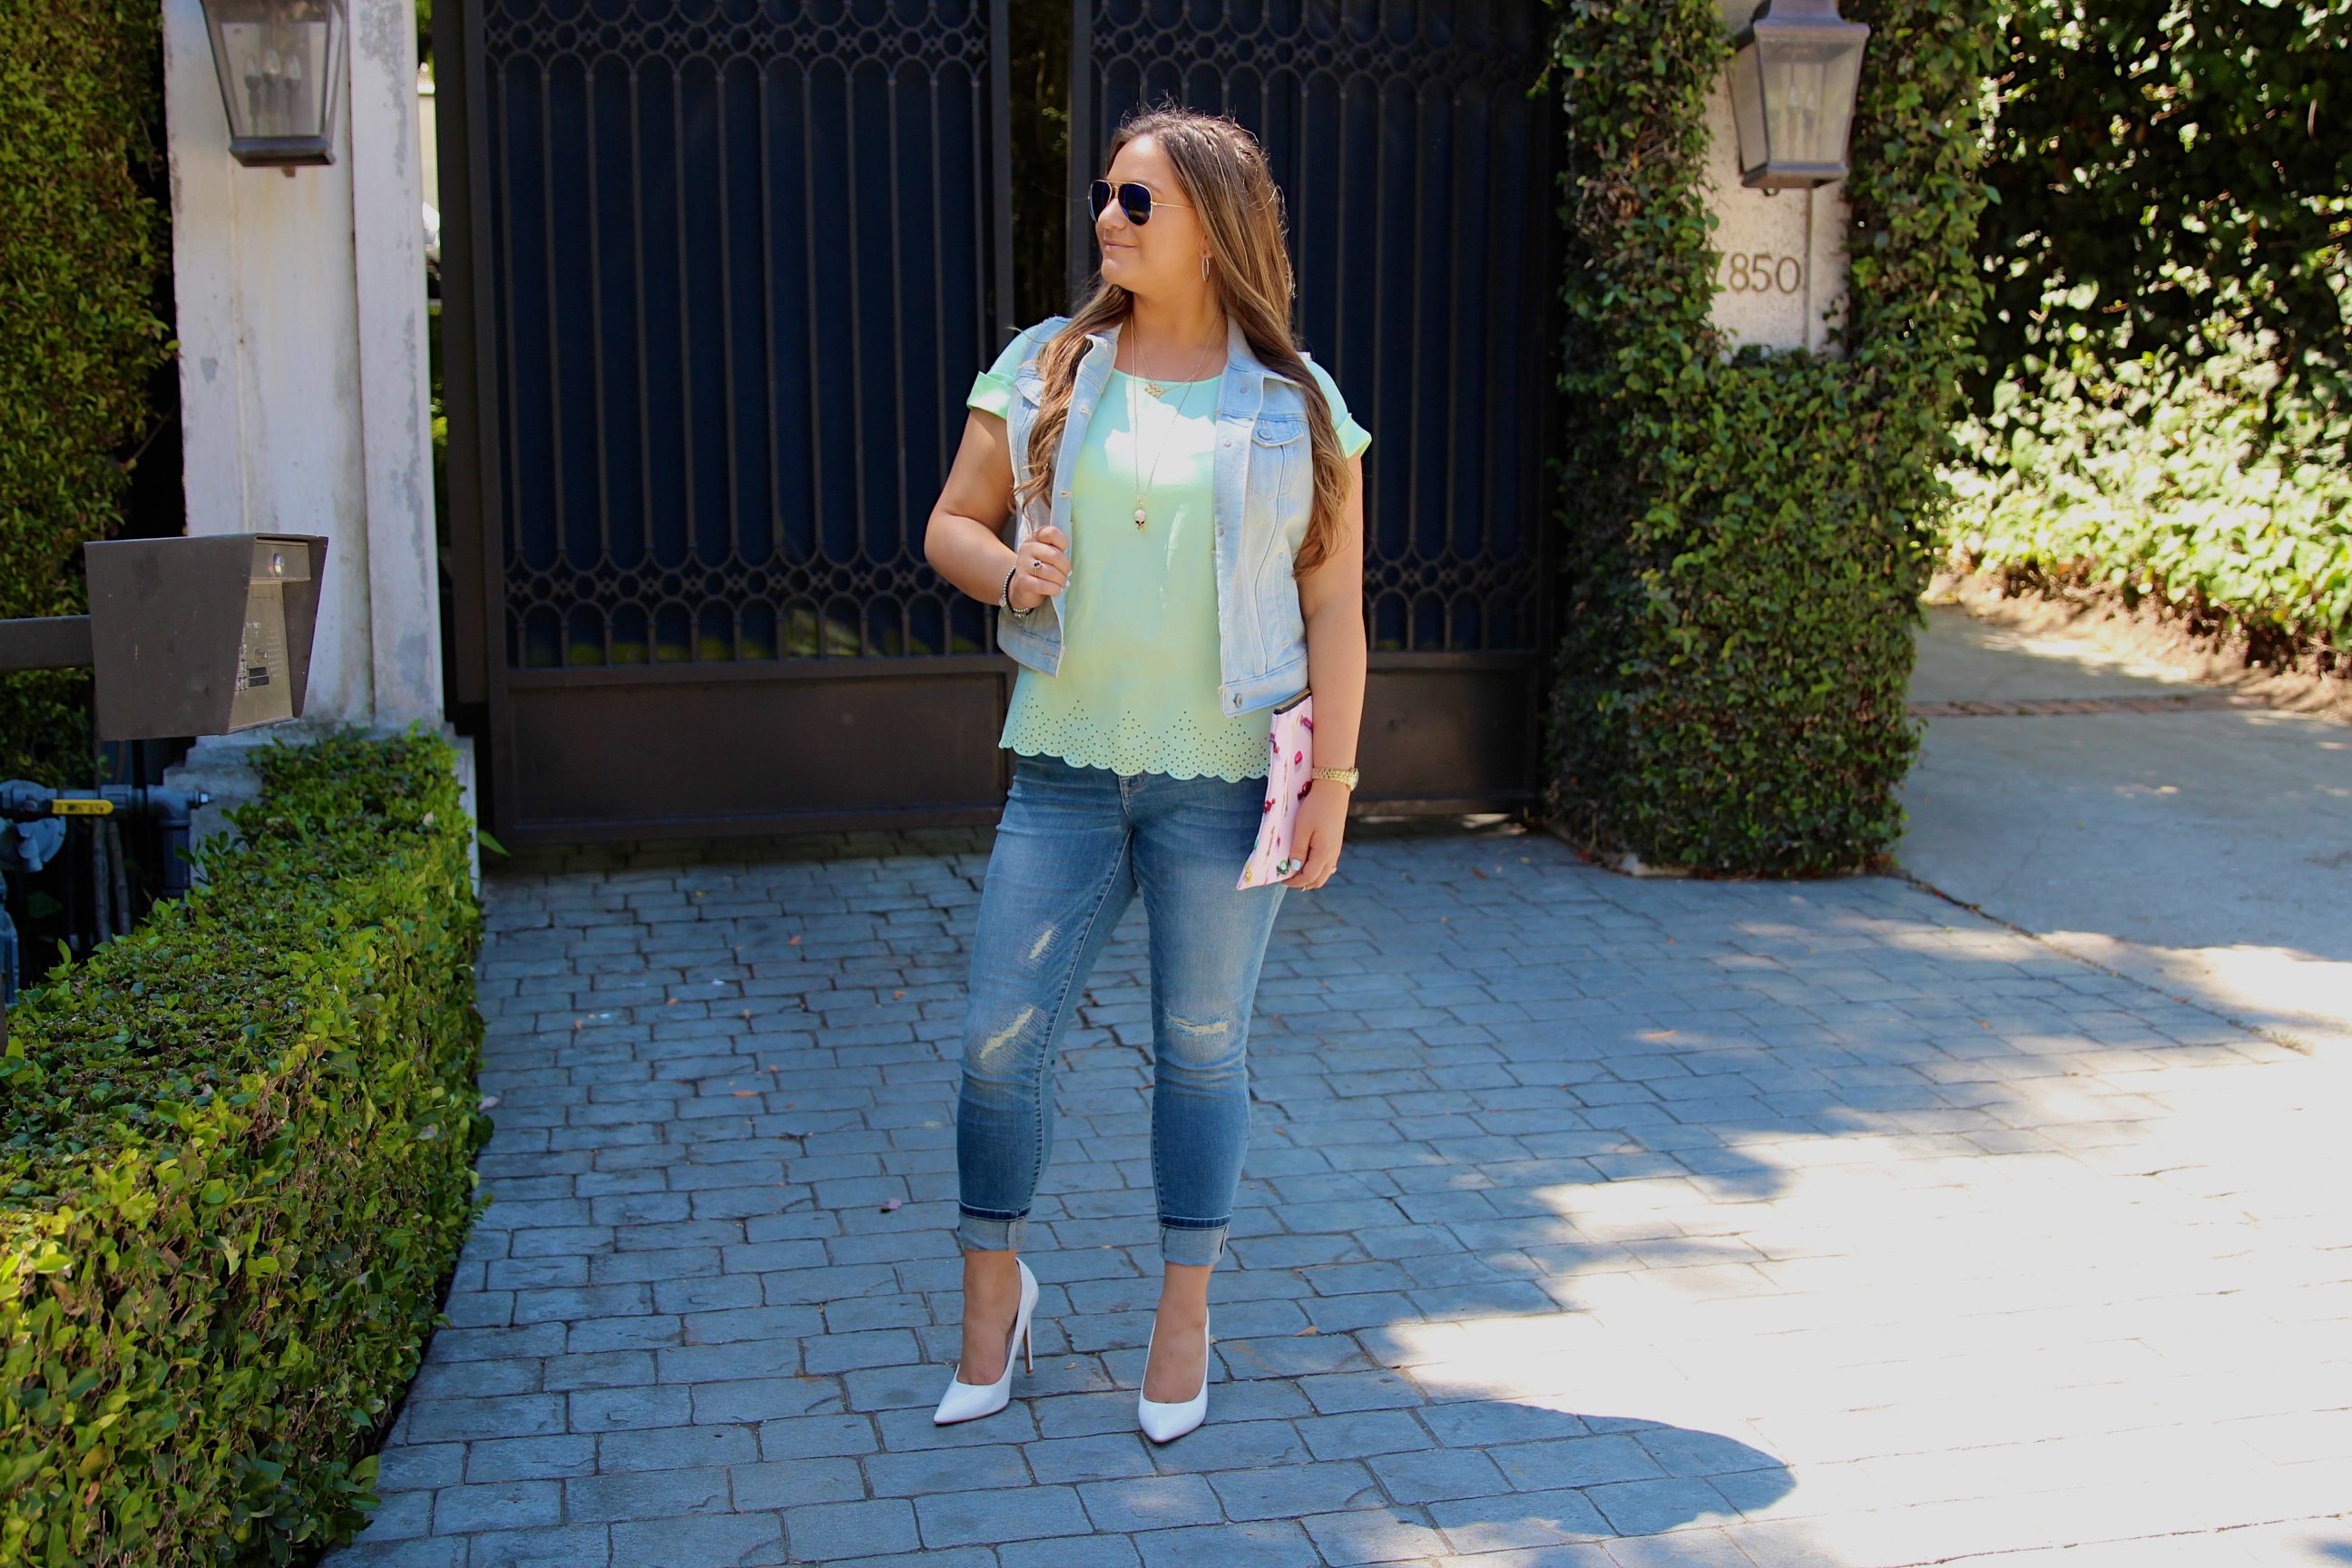 missyonmadison, melissa tierney, redbubble, candy clutch, redbubble clutch, mint scallop top, scallop blouse, mint green blouse, target style, target jeans, distresses skinny jeans, skinny jeans, blue ray bans, mirrored aviators, denim vest, old navy denim vest, white pointed pumps, white pumps, pointed toe pumps, fall style, fall trends, outfit inspo, how to wear white pumps, outfit inspiration,